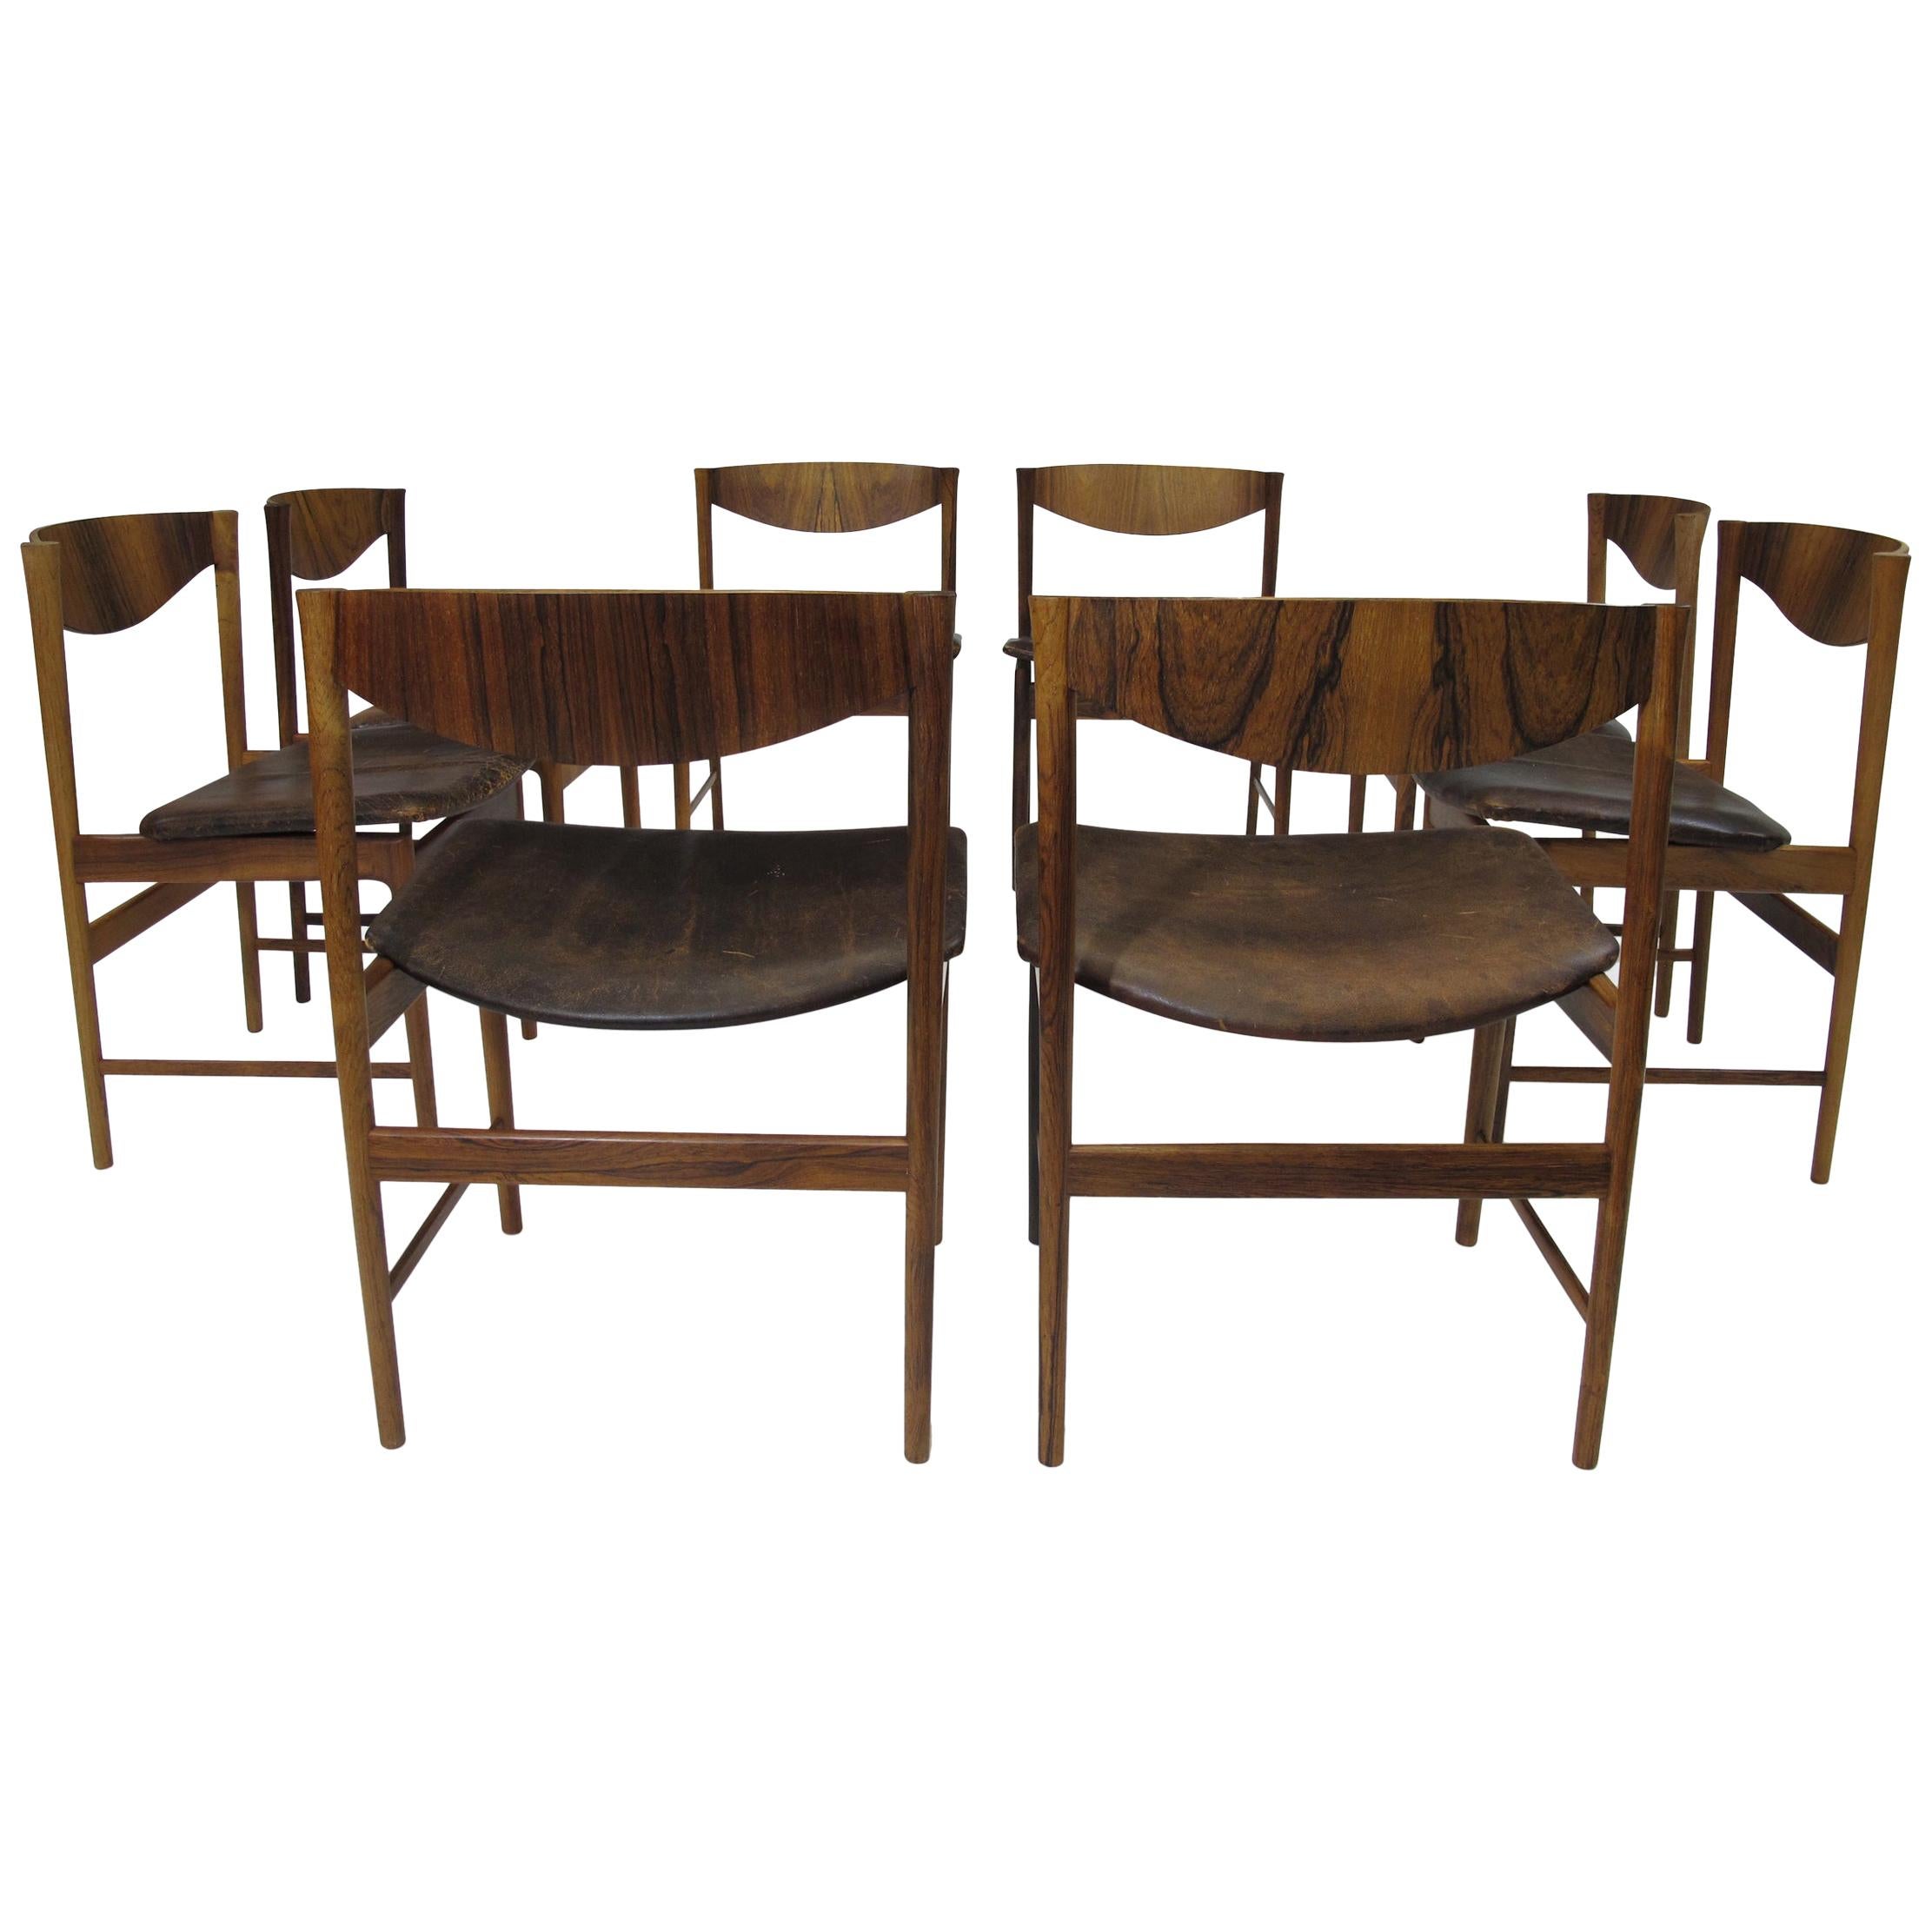 I.B Kofoed Larsen for Saffle Rosewood Dining Chairs, Set of 8